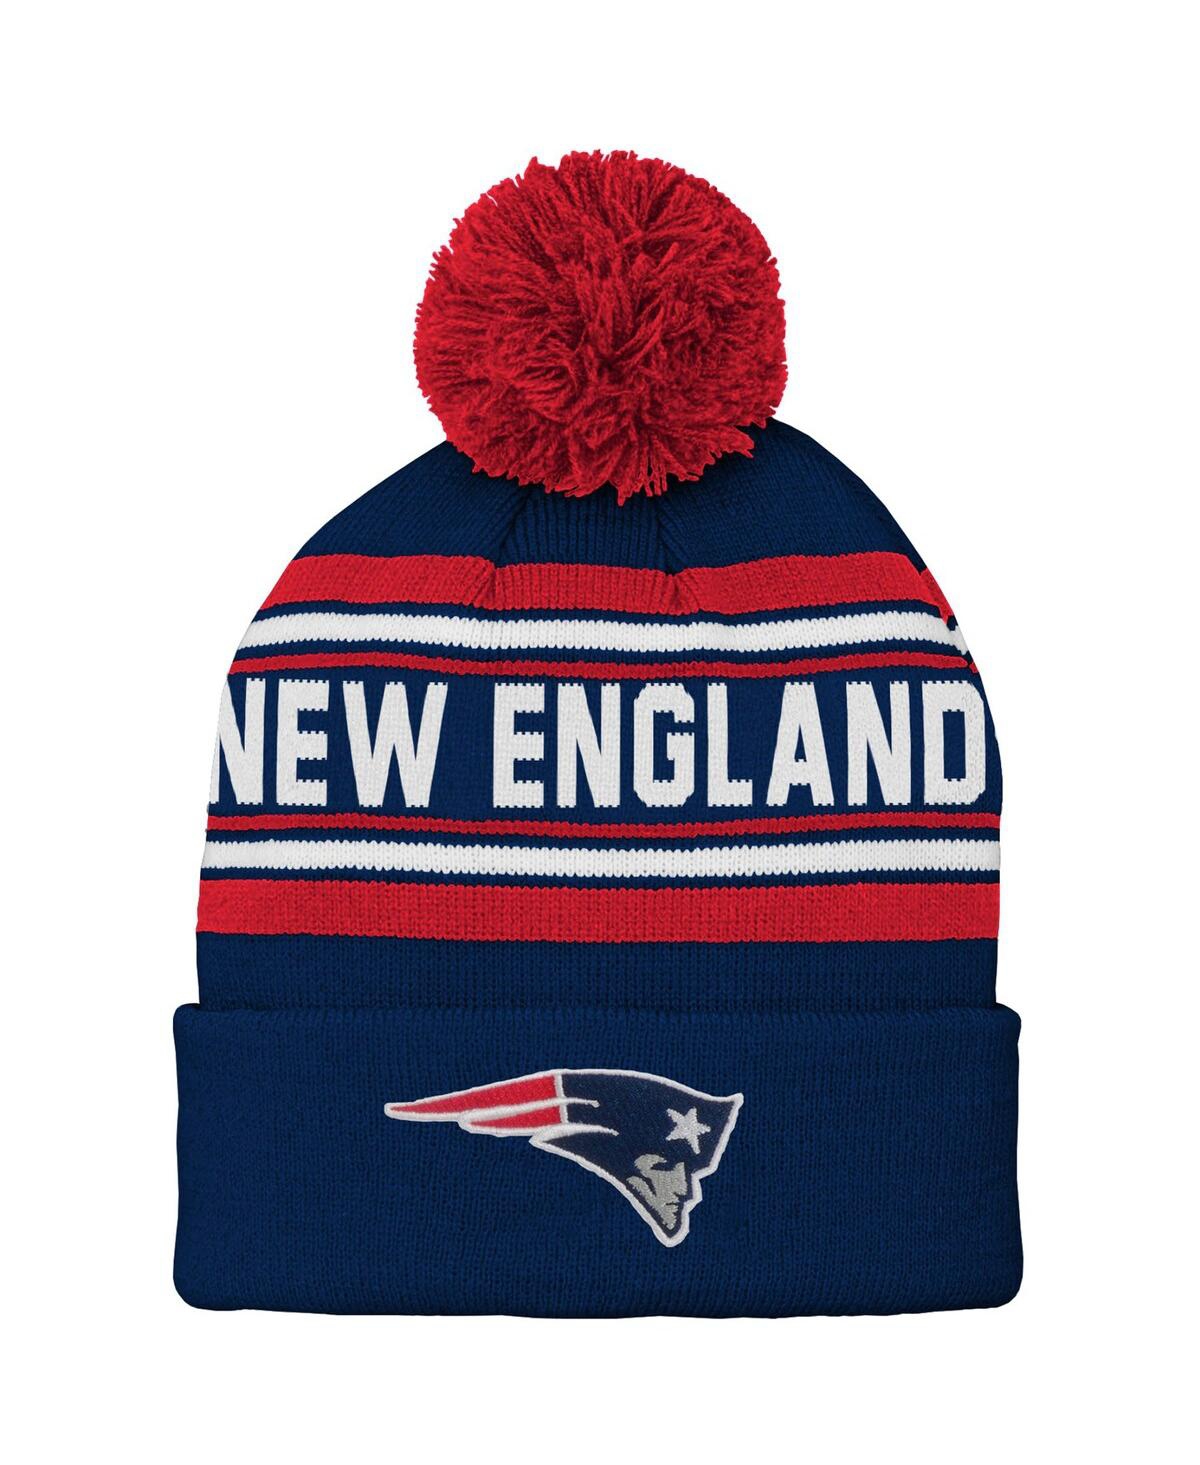 OUTERSTUFF LITTLE BOYS AND GIRLS NAVY NEW ENGLAND PATRIOTS JACQUARD CUFFED KNIT HAT WITH POM